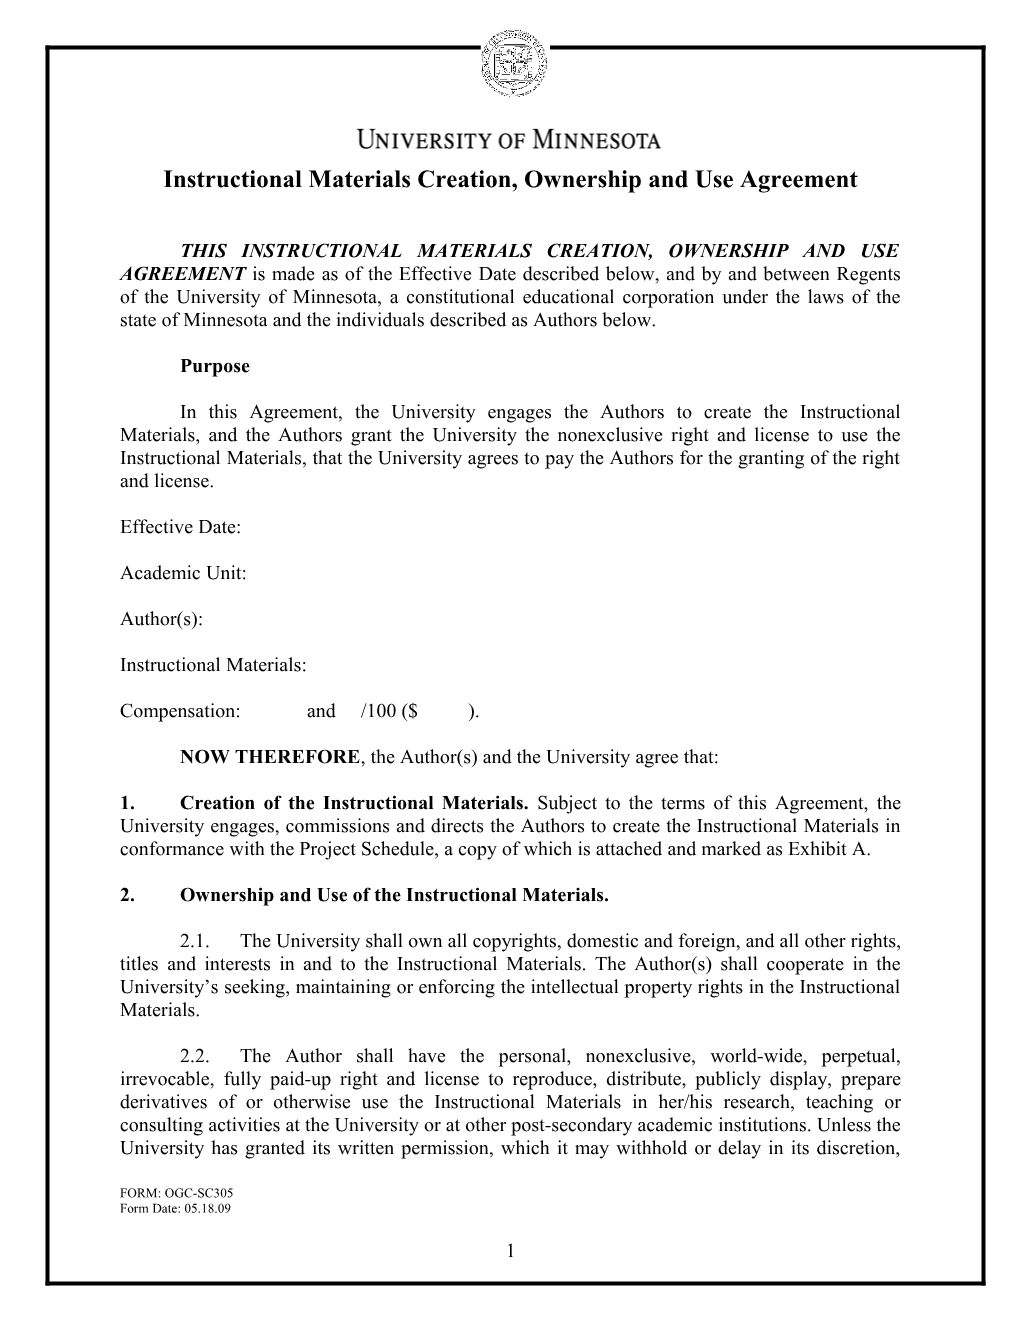 Instructional Materials Creation, Ownership and Use Agreement